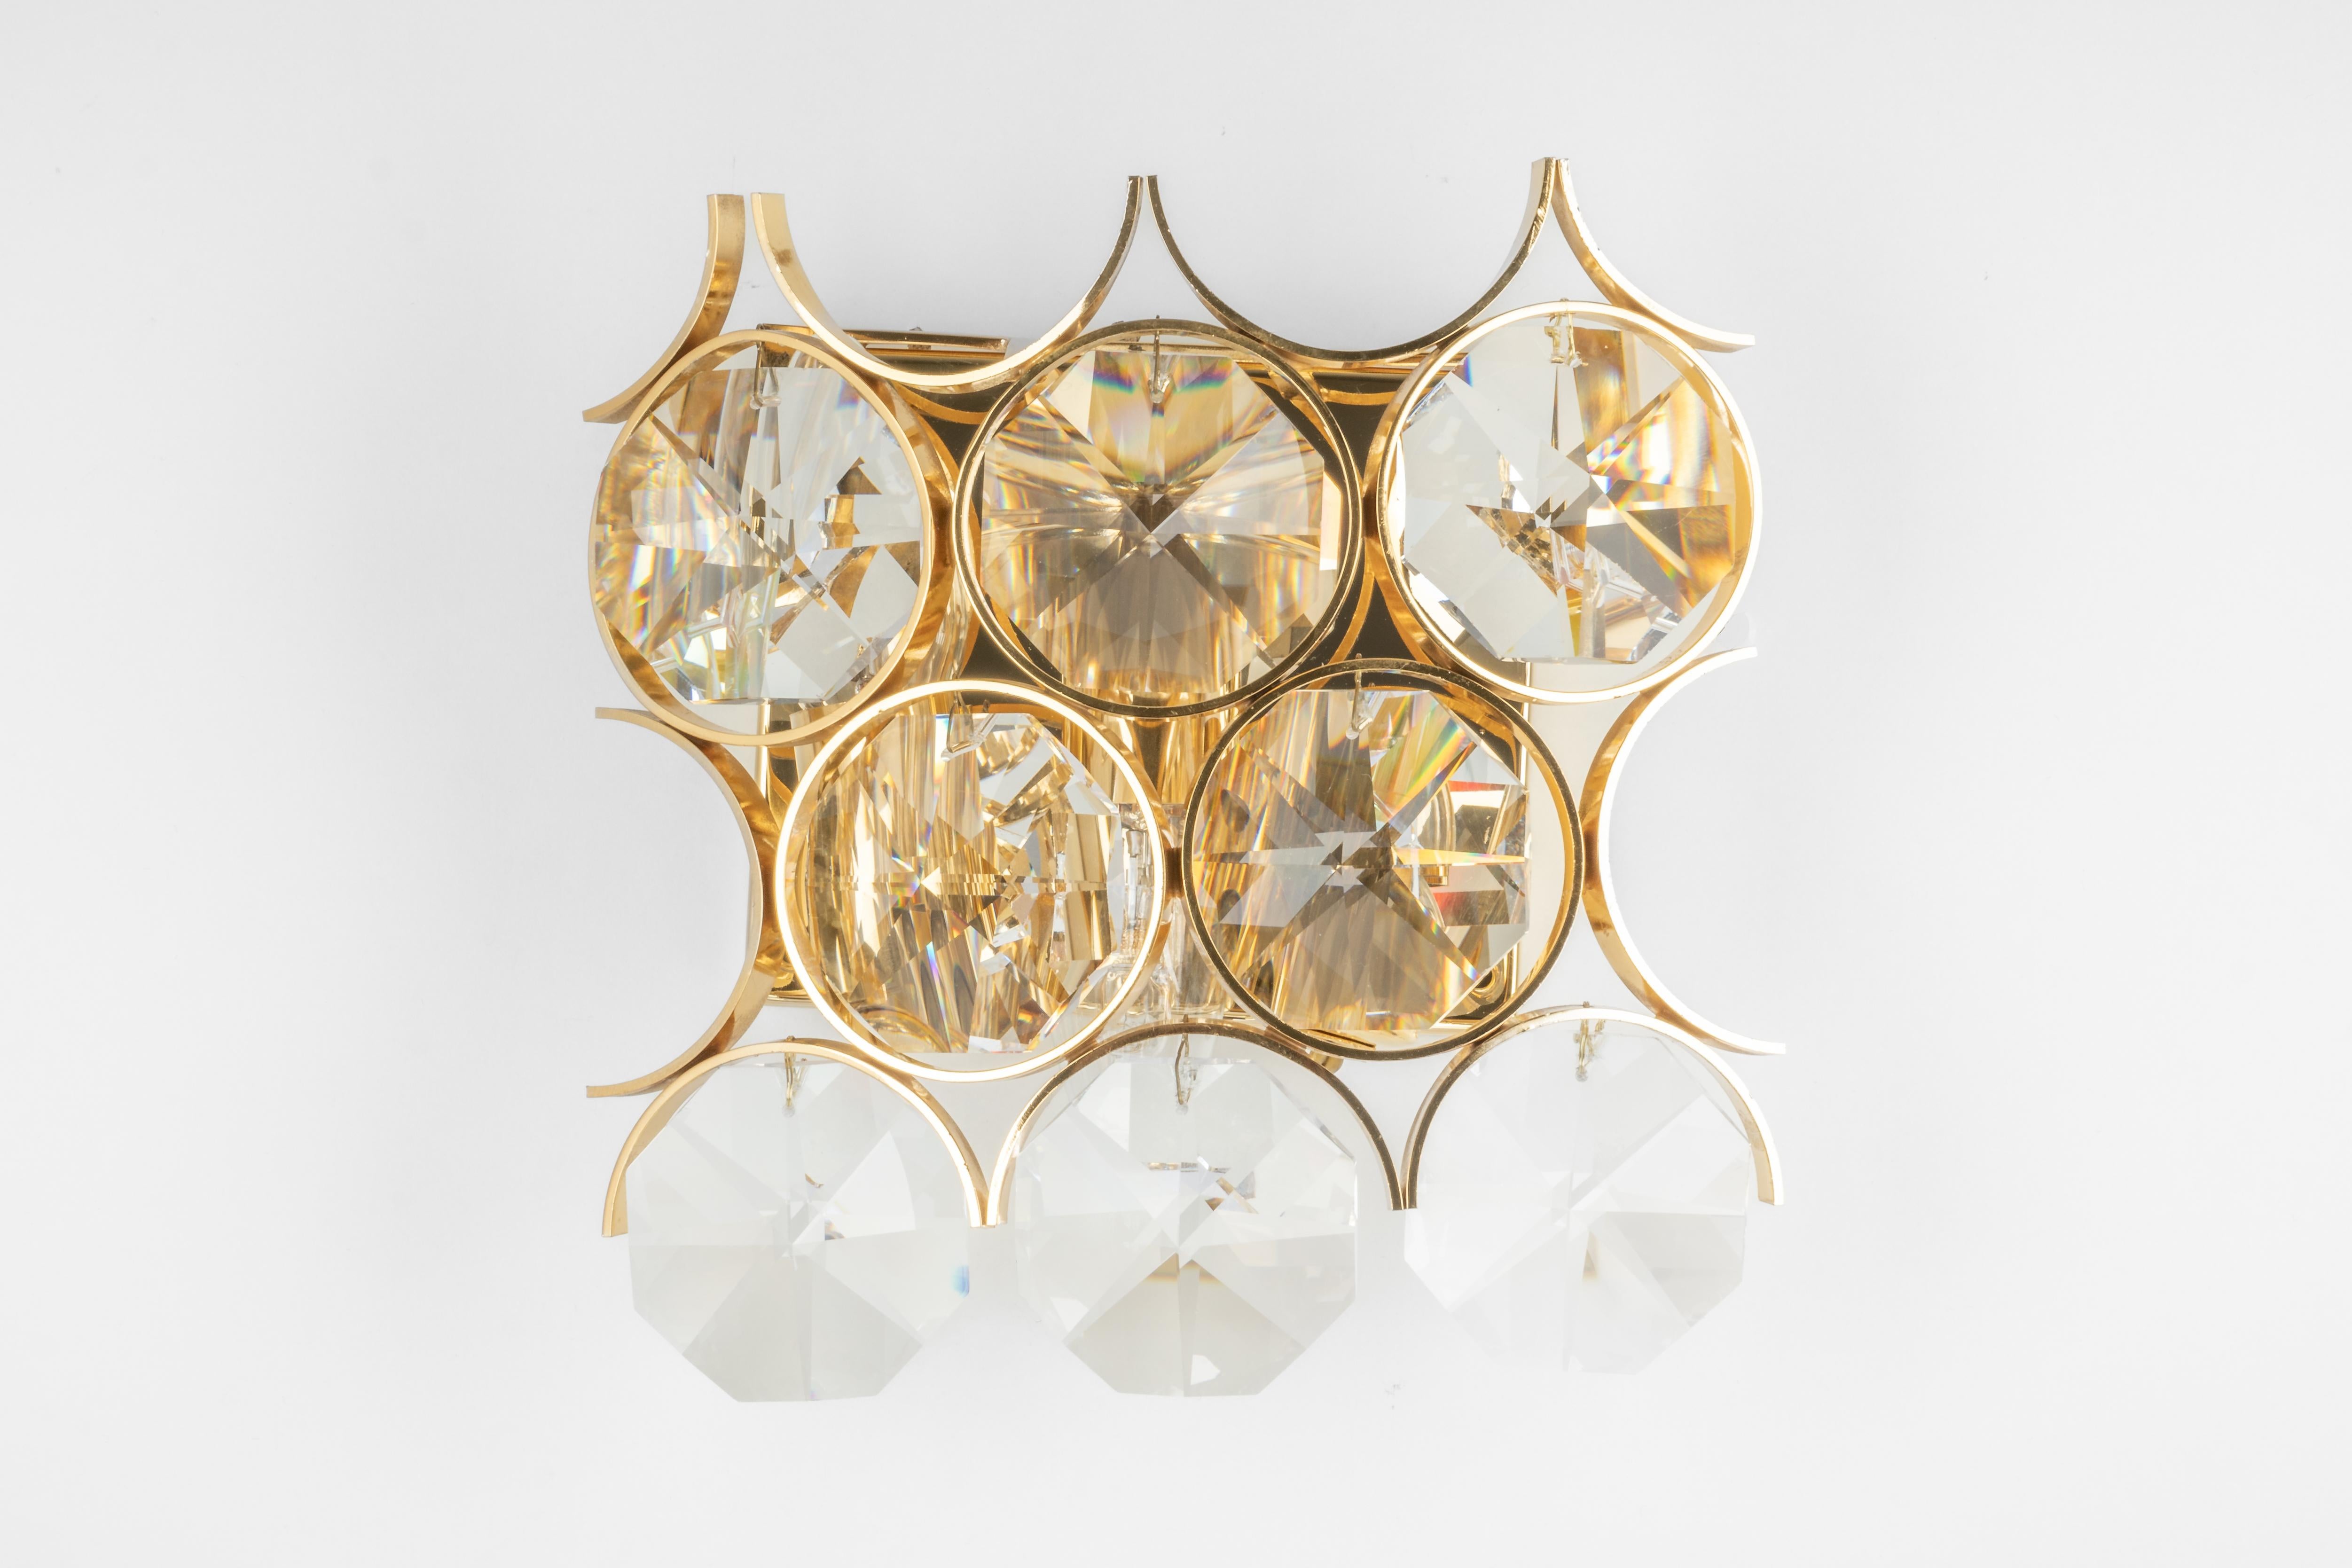 Mid-Century Modern 1 of 2 Pairs of Crystal Wall Lights, Sciolari Design, Palwa, Germany, 1960s For Sale